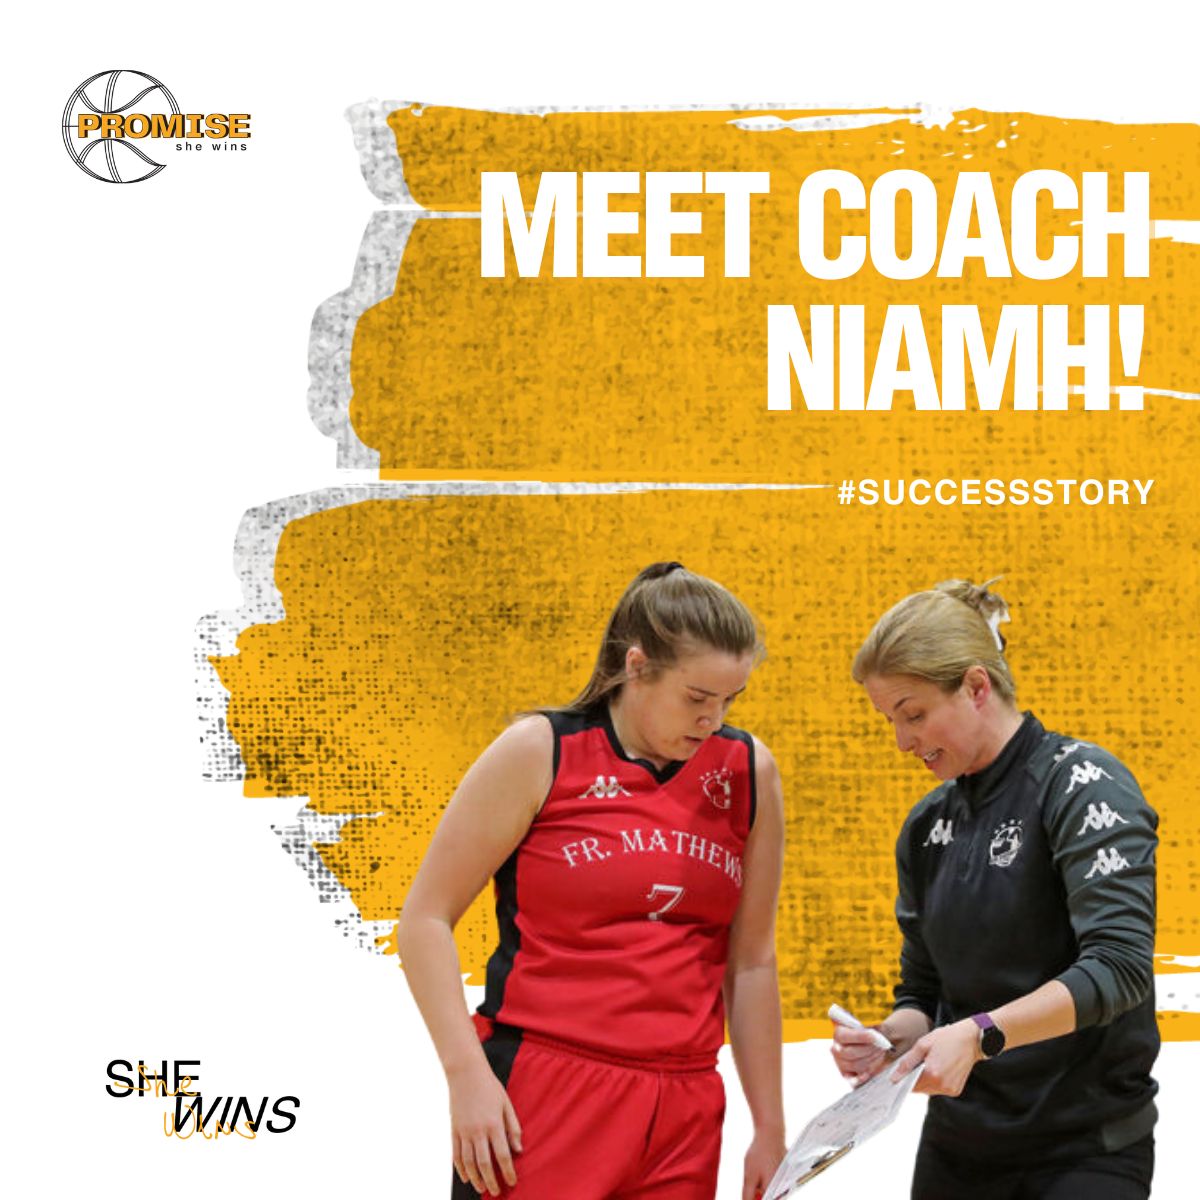 🇮🇪 Hailing from Thurles, Ireland, Coach Niamh Dwyer discovered basketball at 12 and joined the club at the age of 14, eventually reaching international levels. The journey posed challenges of limited resources, requiring self-drive and adaptability.

#shewins #dunkthestigma